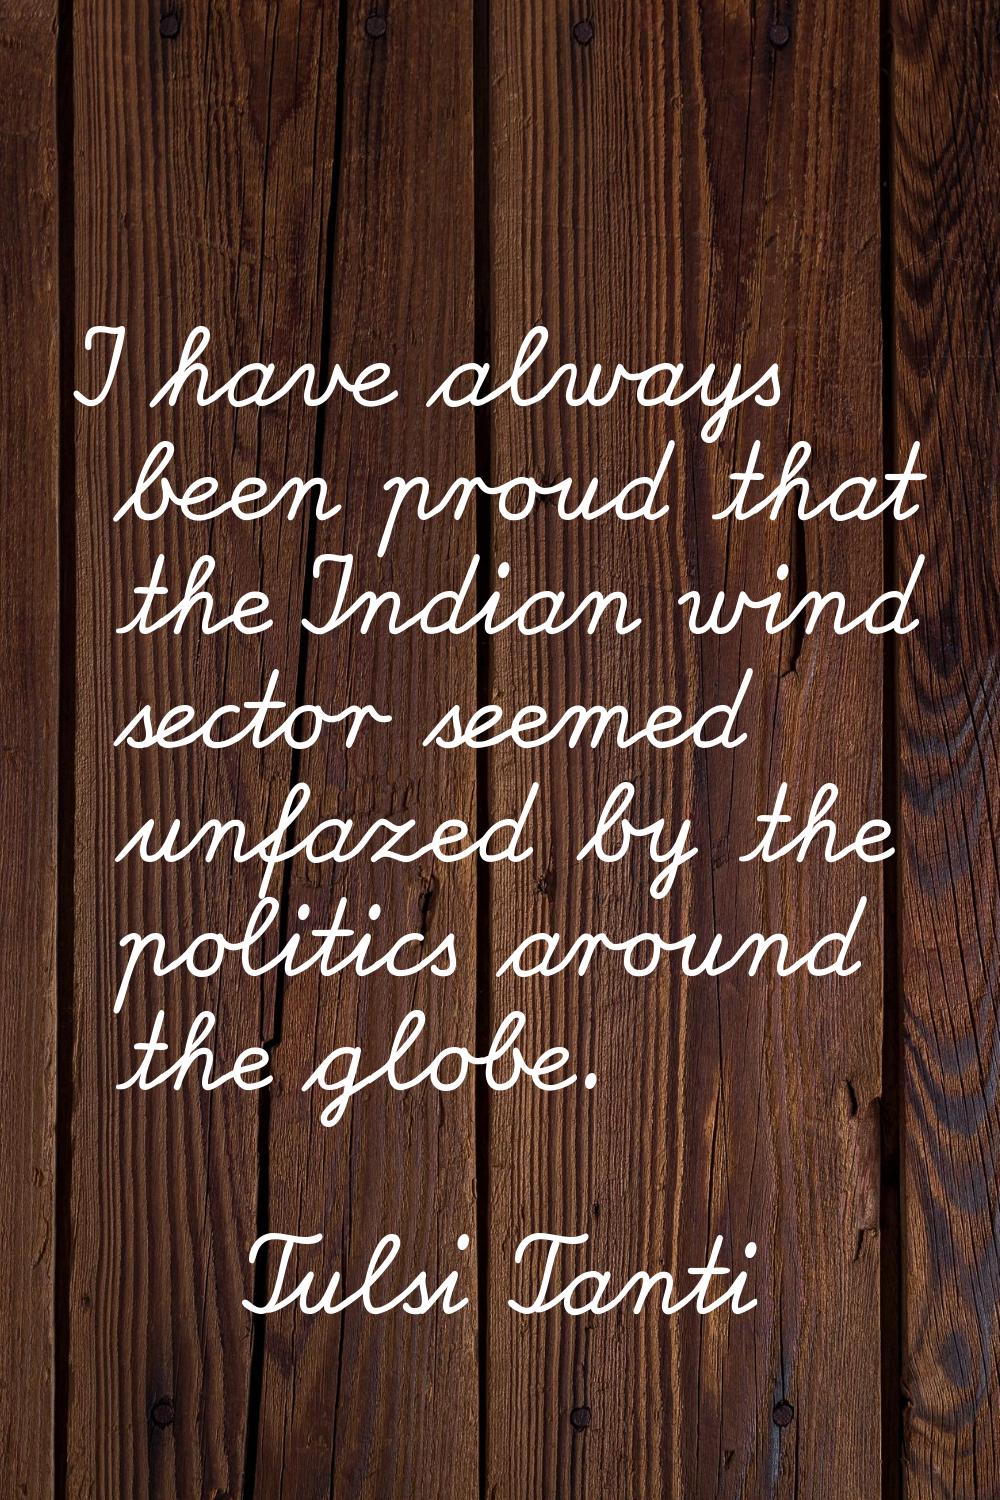 I have always been proud that the Indian wind sector seemed unfazed by the politics around the glob